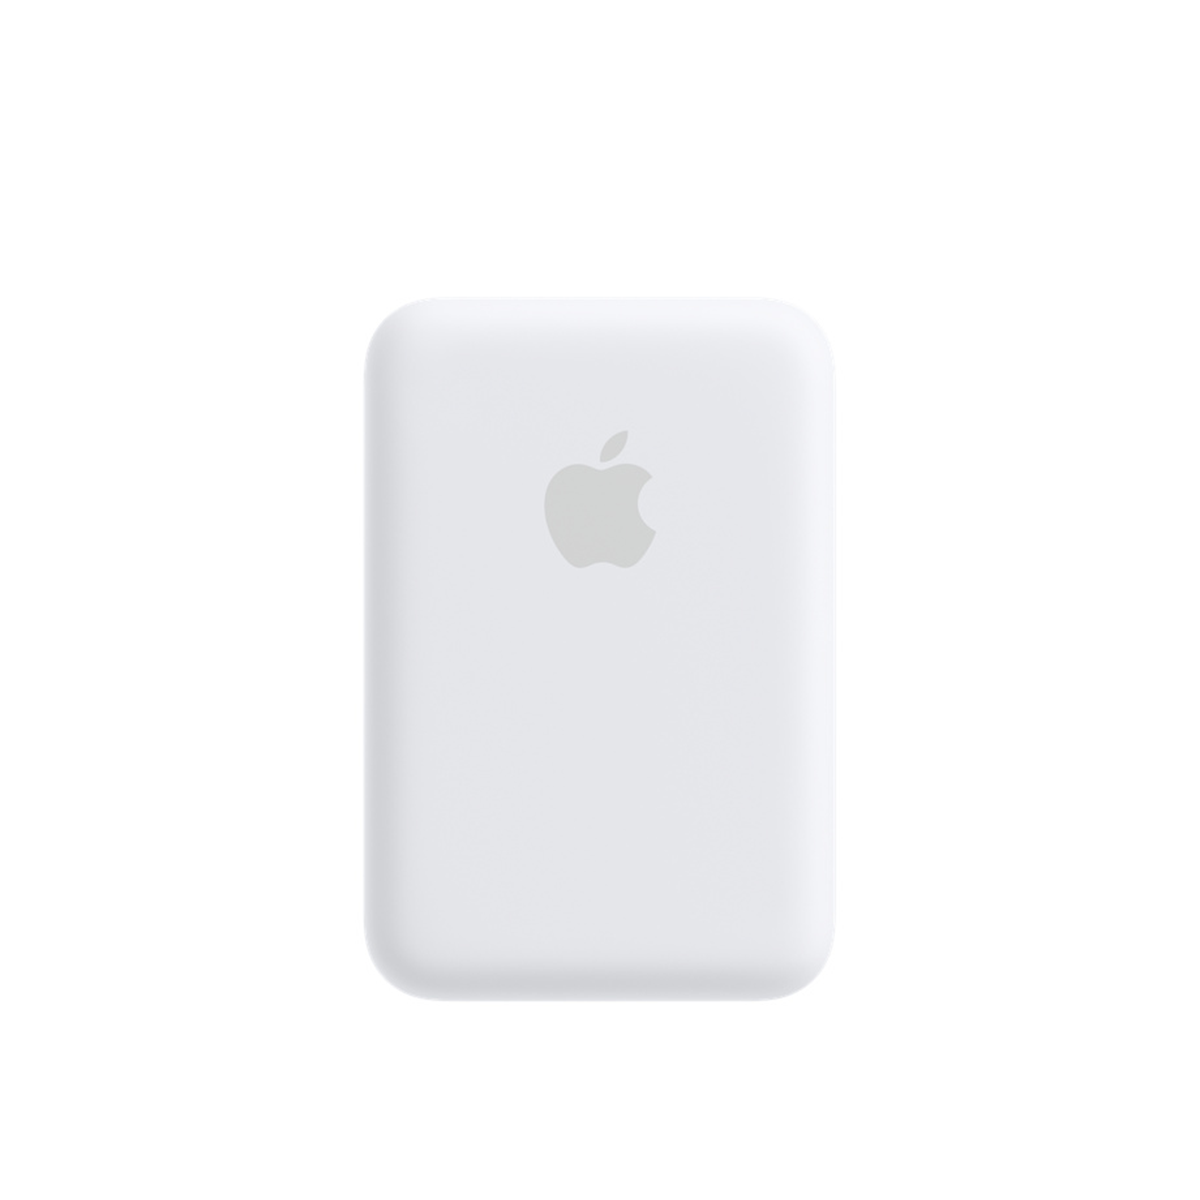  APPLE MAGSAFE BATTERY PACK 